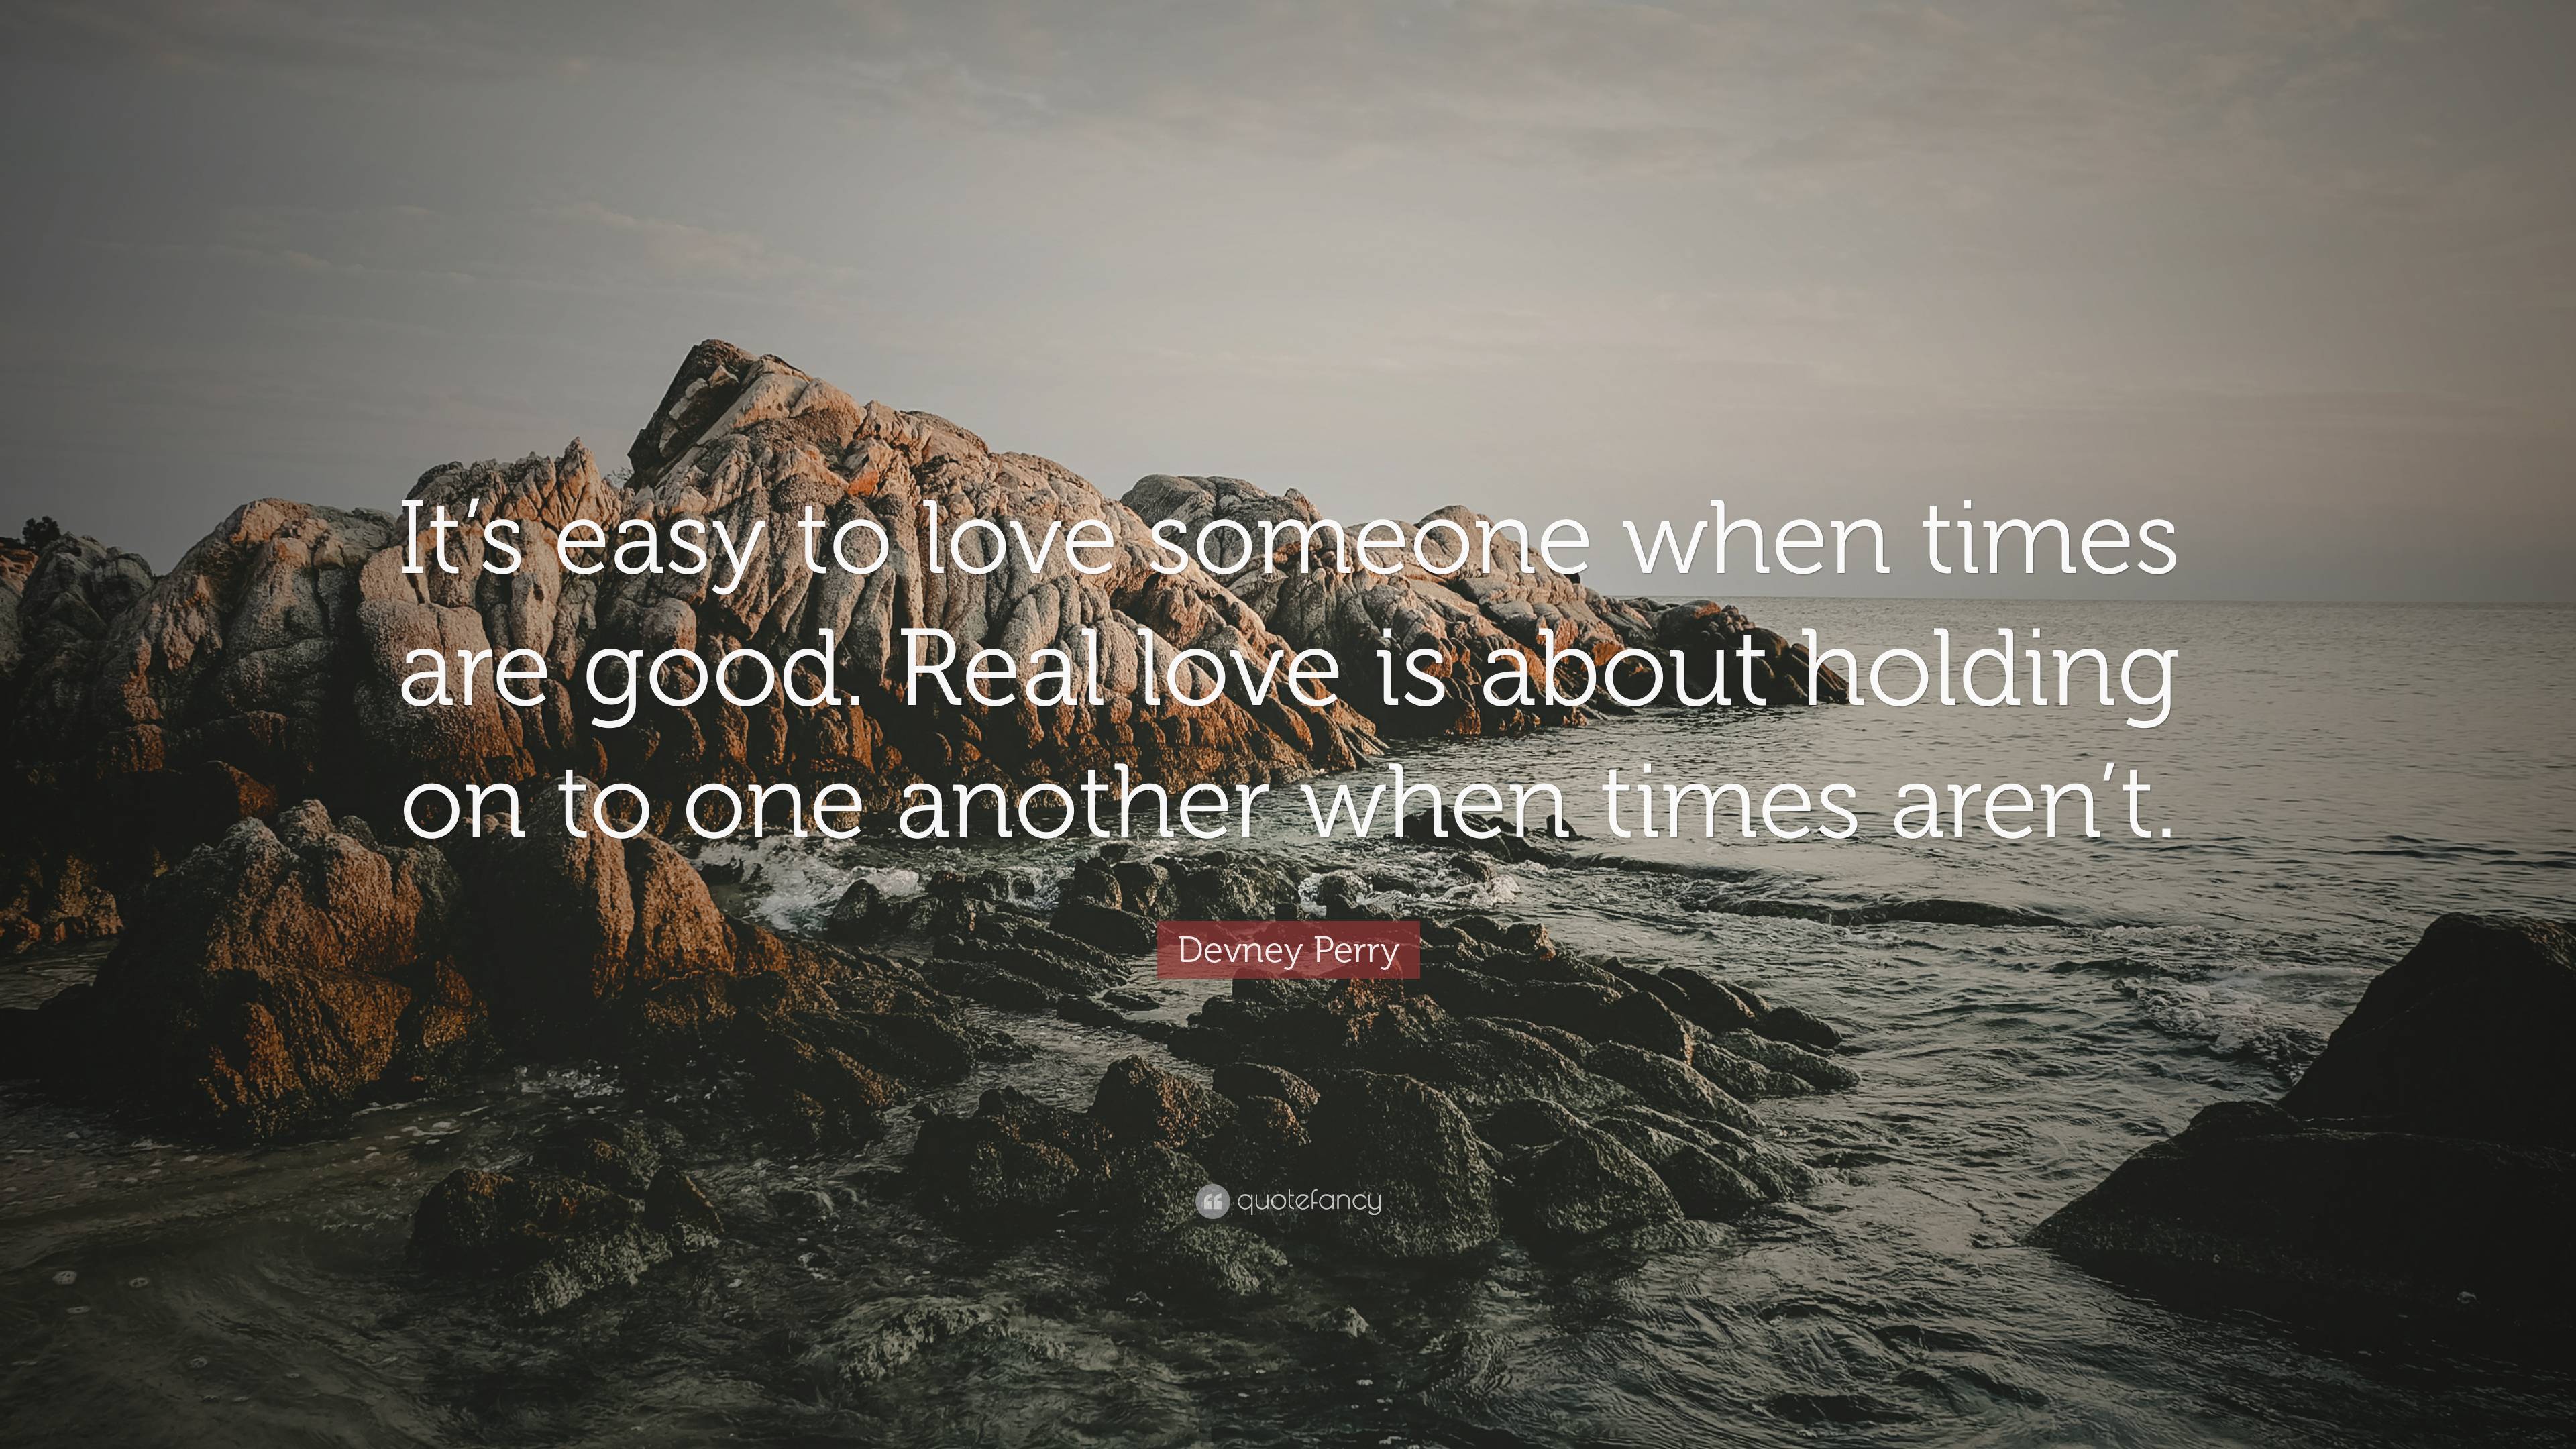 Devney Perry Quote: “It's easy to love someone when times are good. Real  love is about